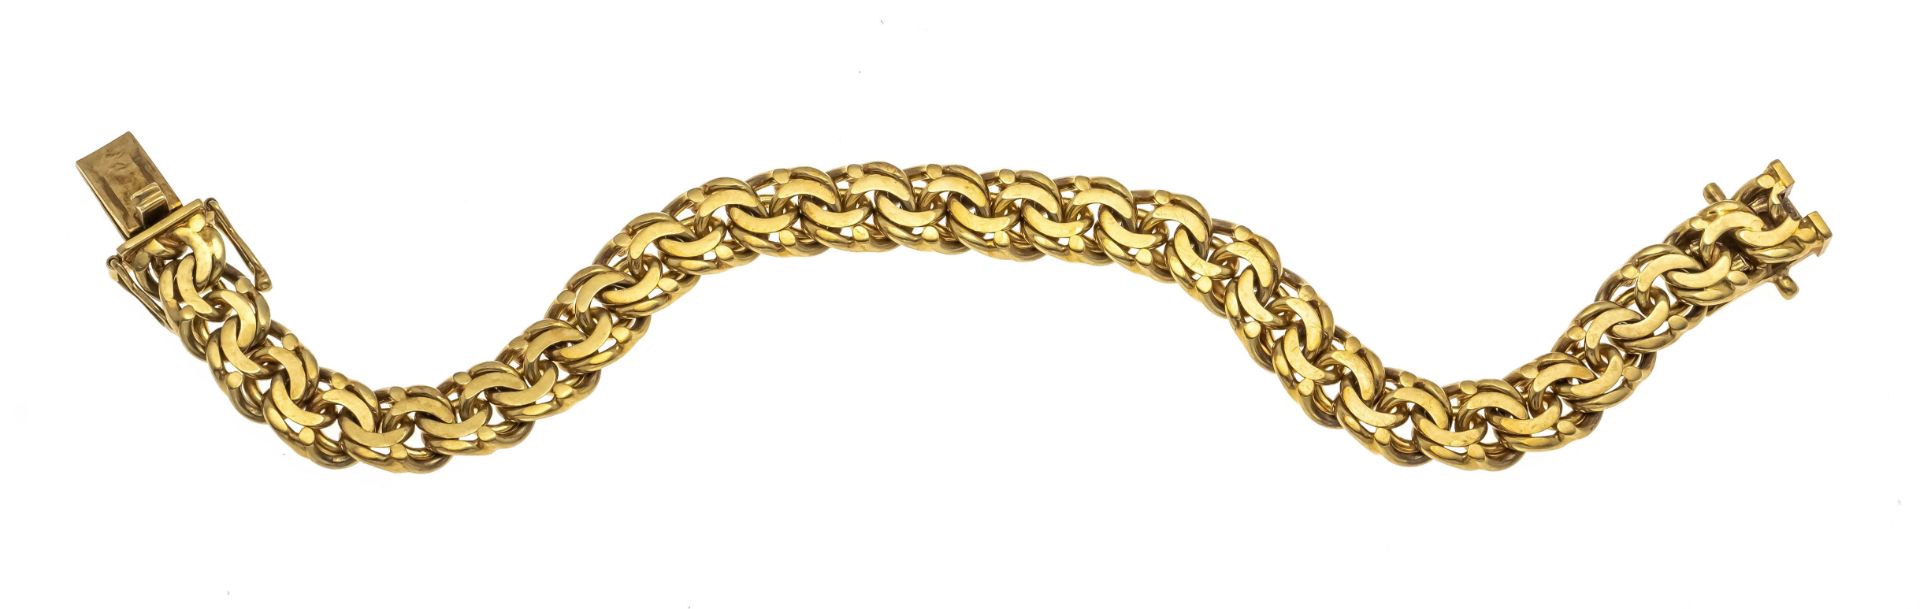 Garibaldi bracelet GG 585/000 w. 8,3 mm, with box clasp and 2 SI-eights, l. 19,3 cm, 33,3 g - Image 2 of 2